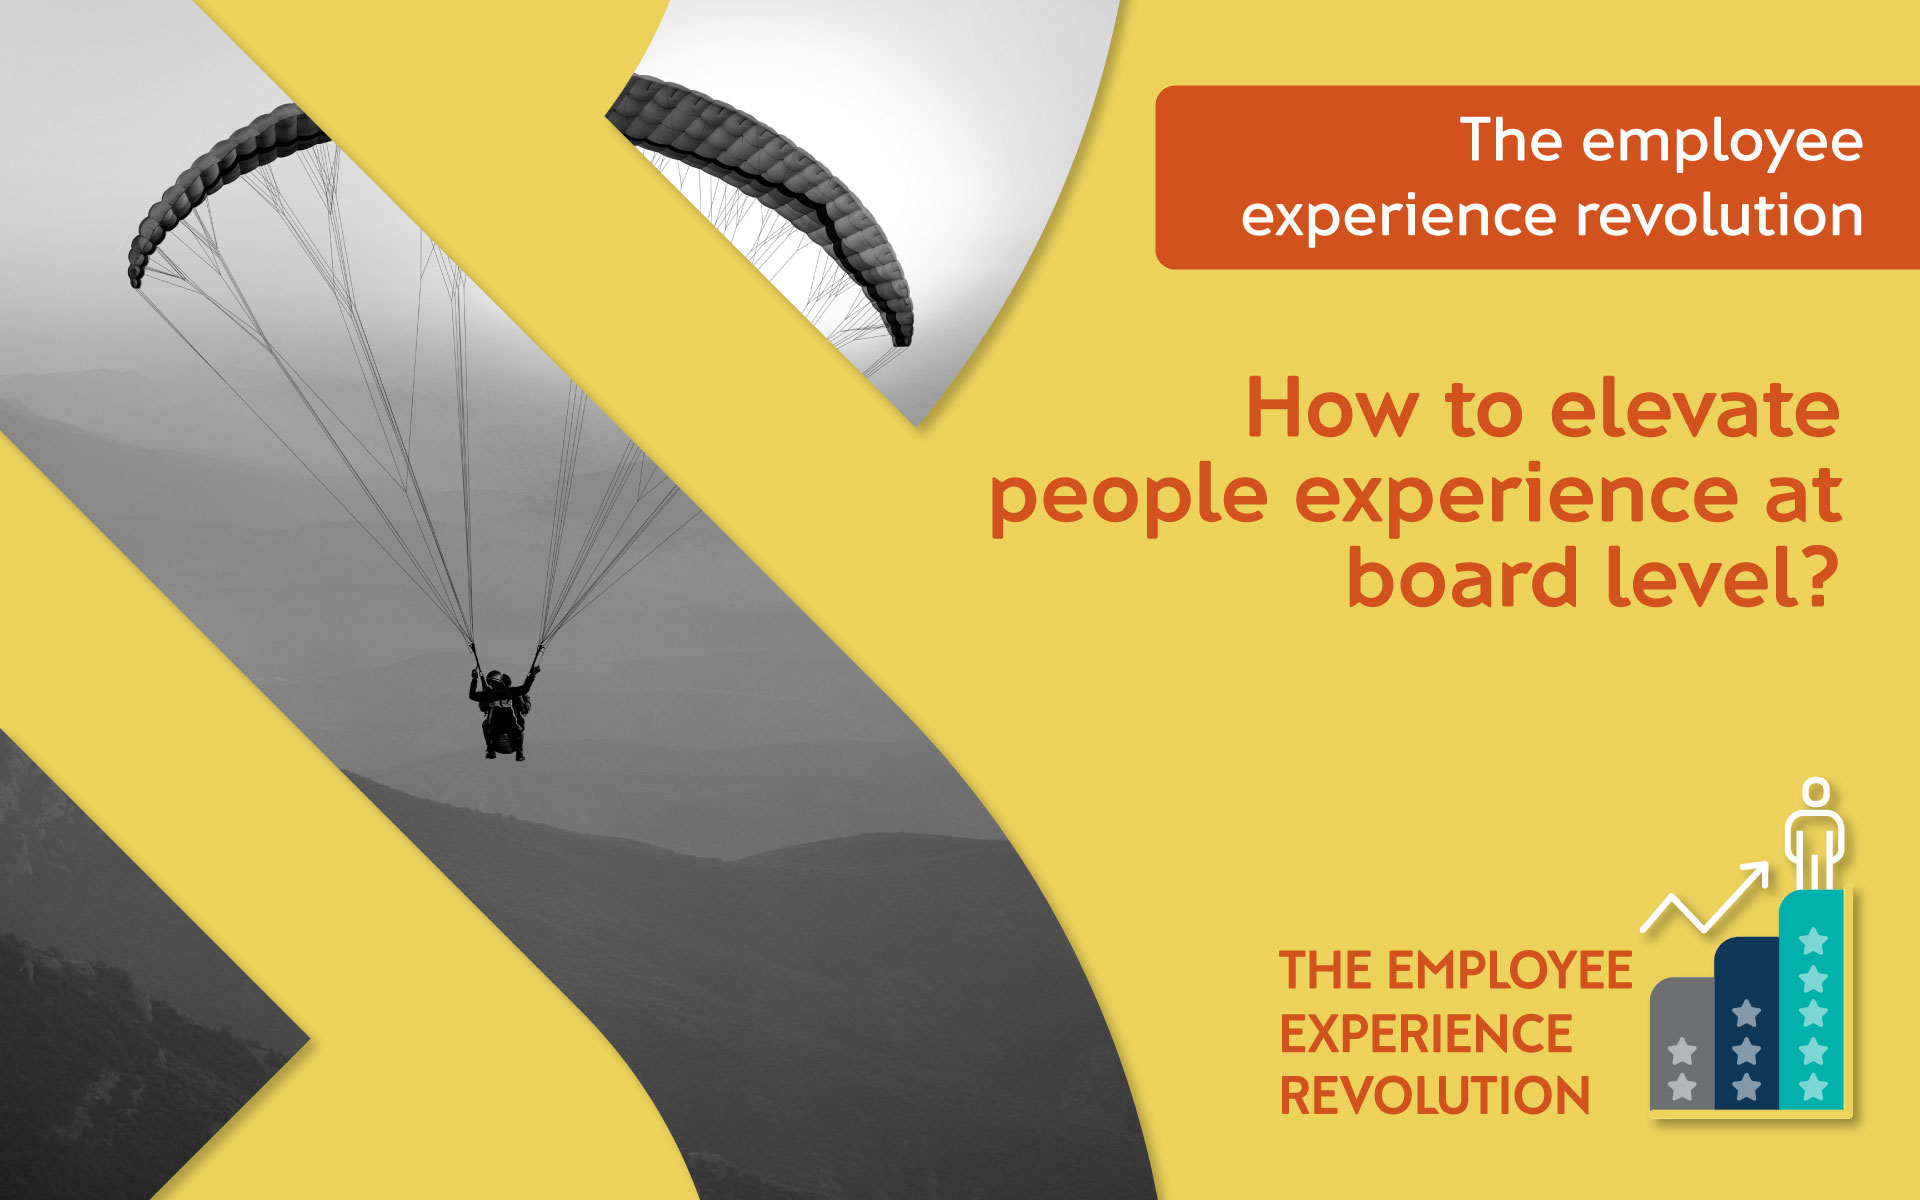 How to elevate people experience at board level